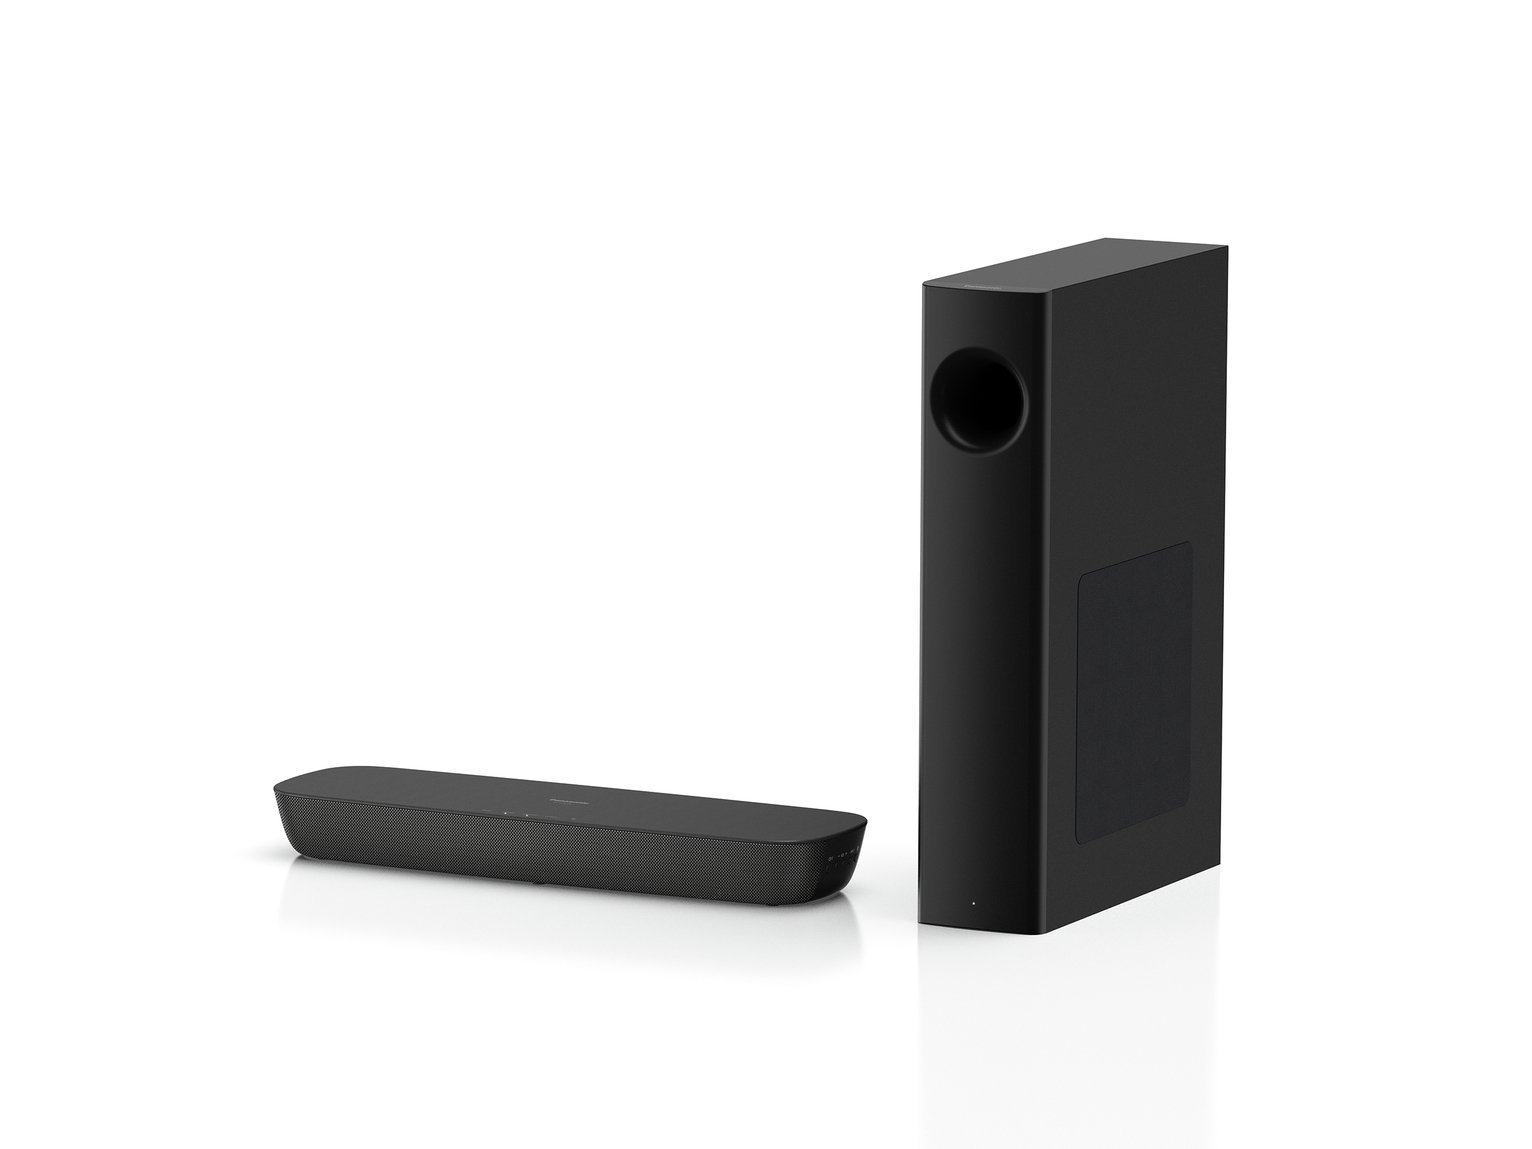 Panasonic SC-HTB258 120W RMS 2.1Ch Sound Bar with Sub Review